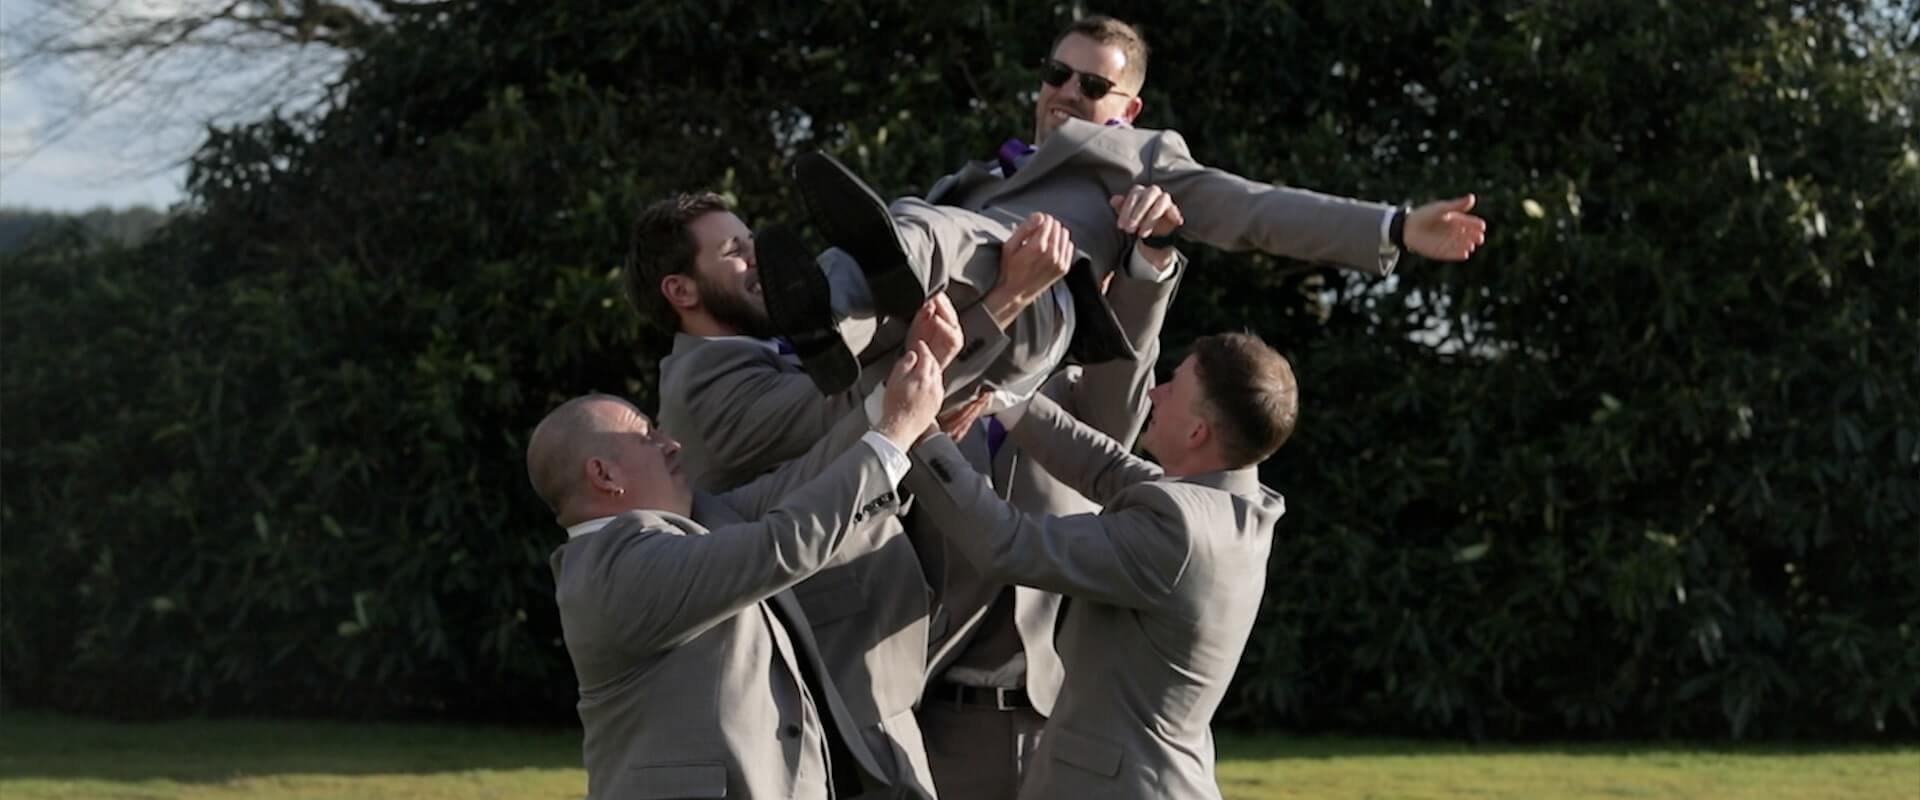 The Grooms men collectively throw Alex into the air and catch him again